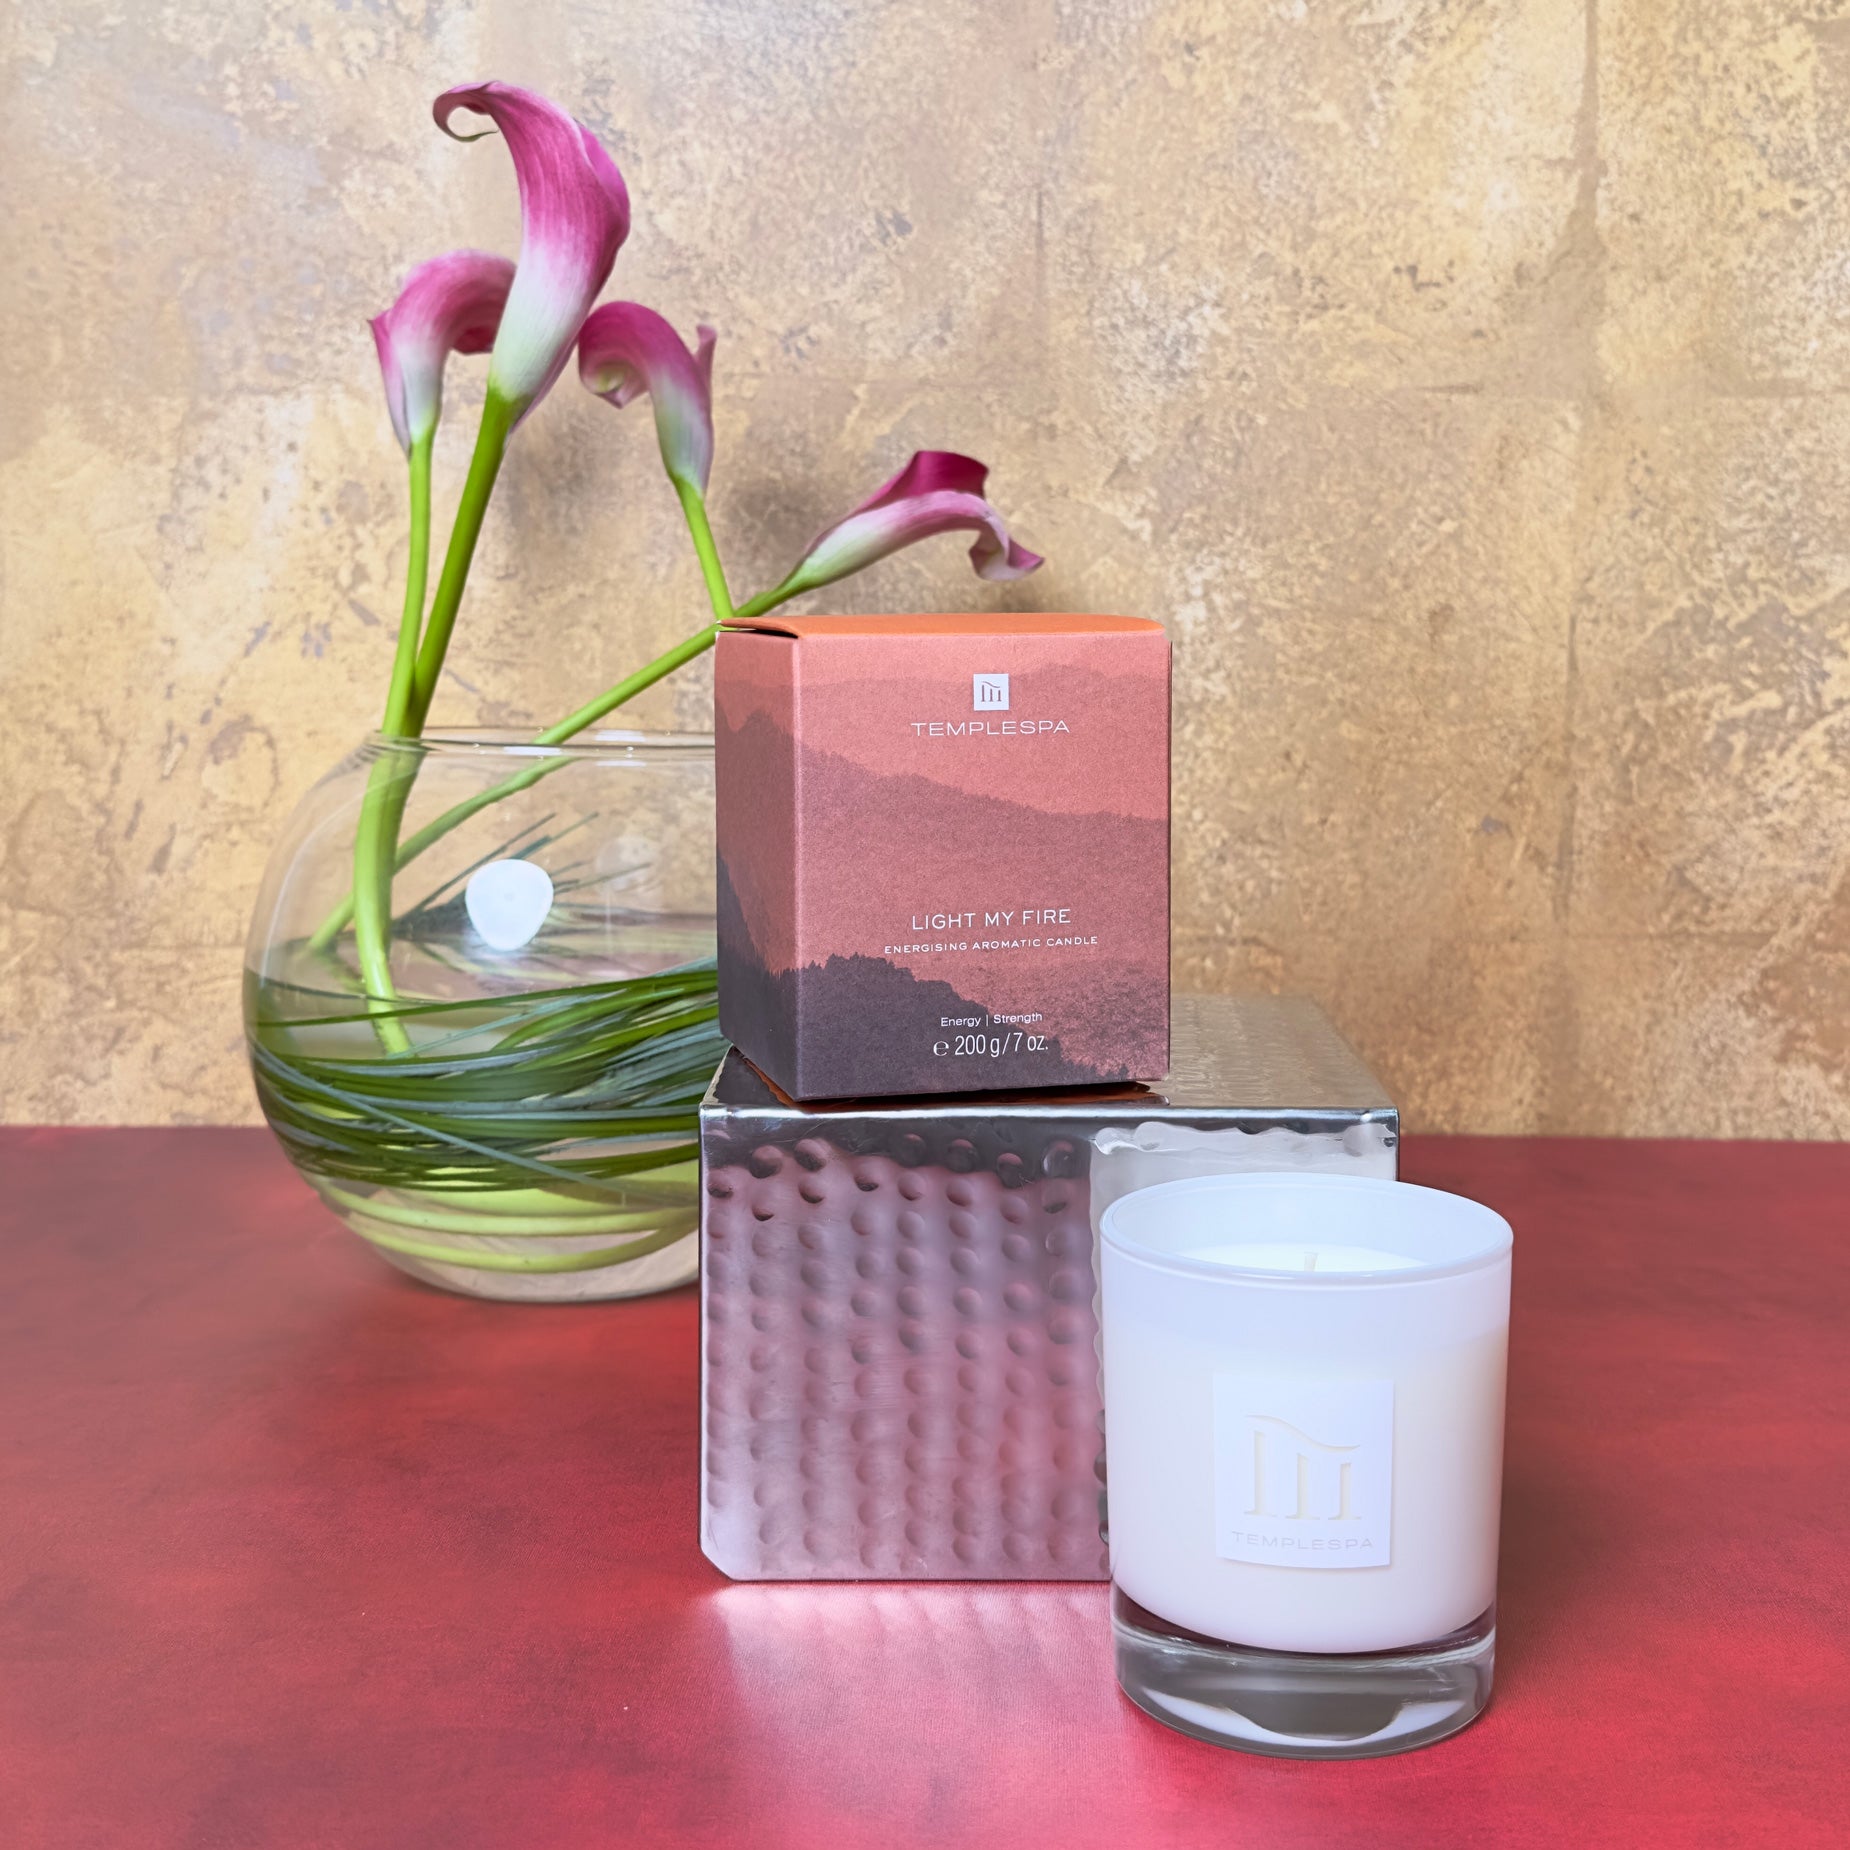 Light My Fire - TempleSpa Energising Aromatherapy Scented Candle